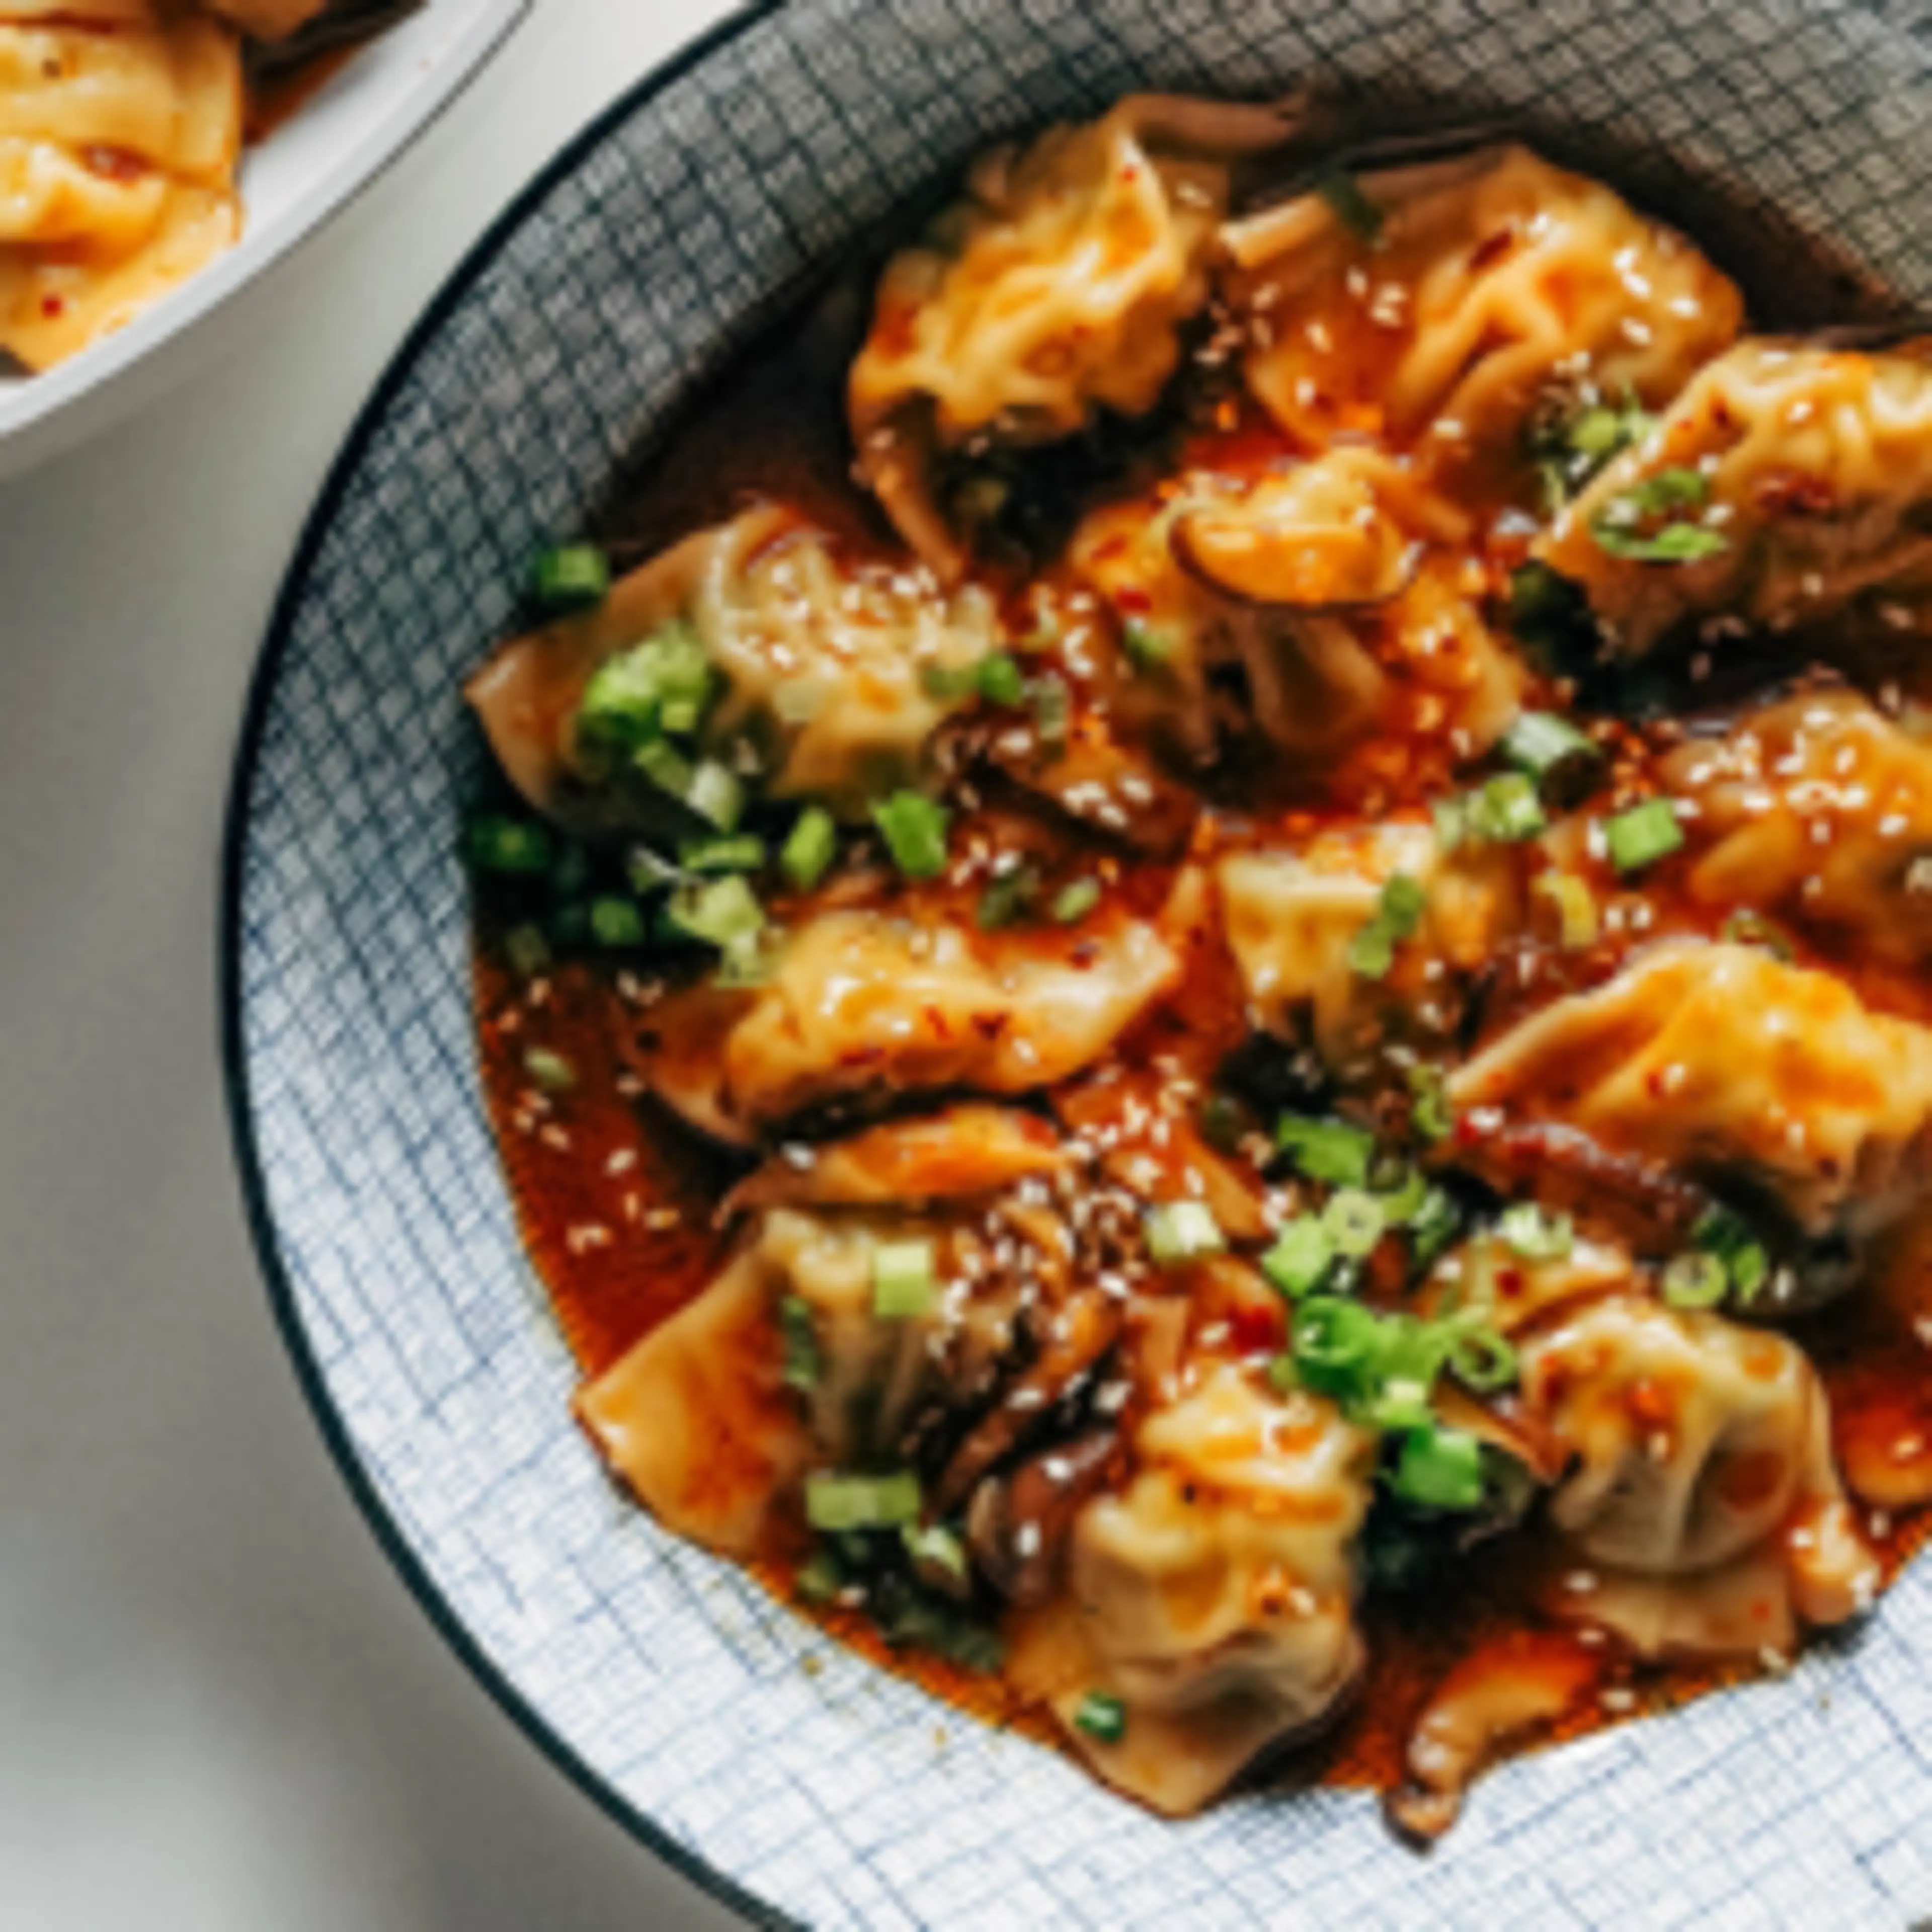 Chicken Wontons in Spicy Chili Sauce